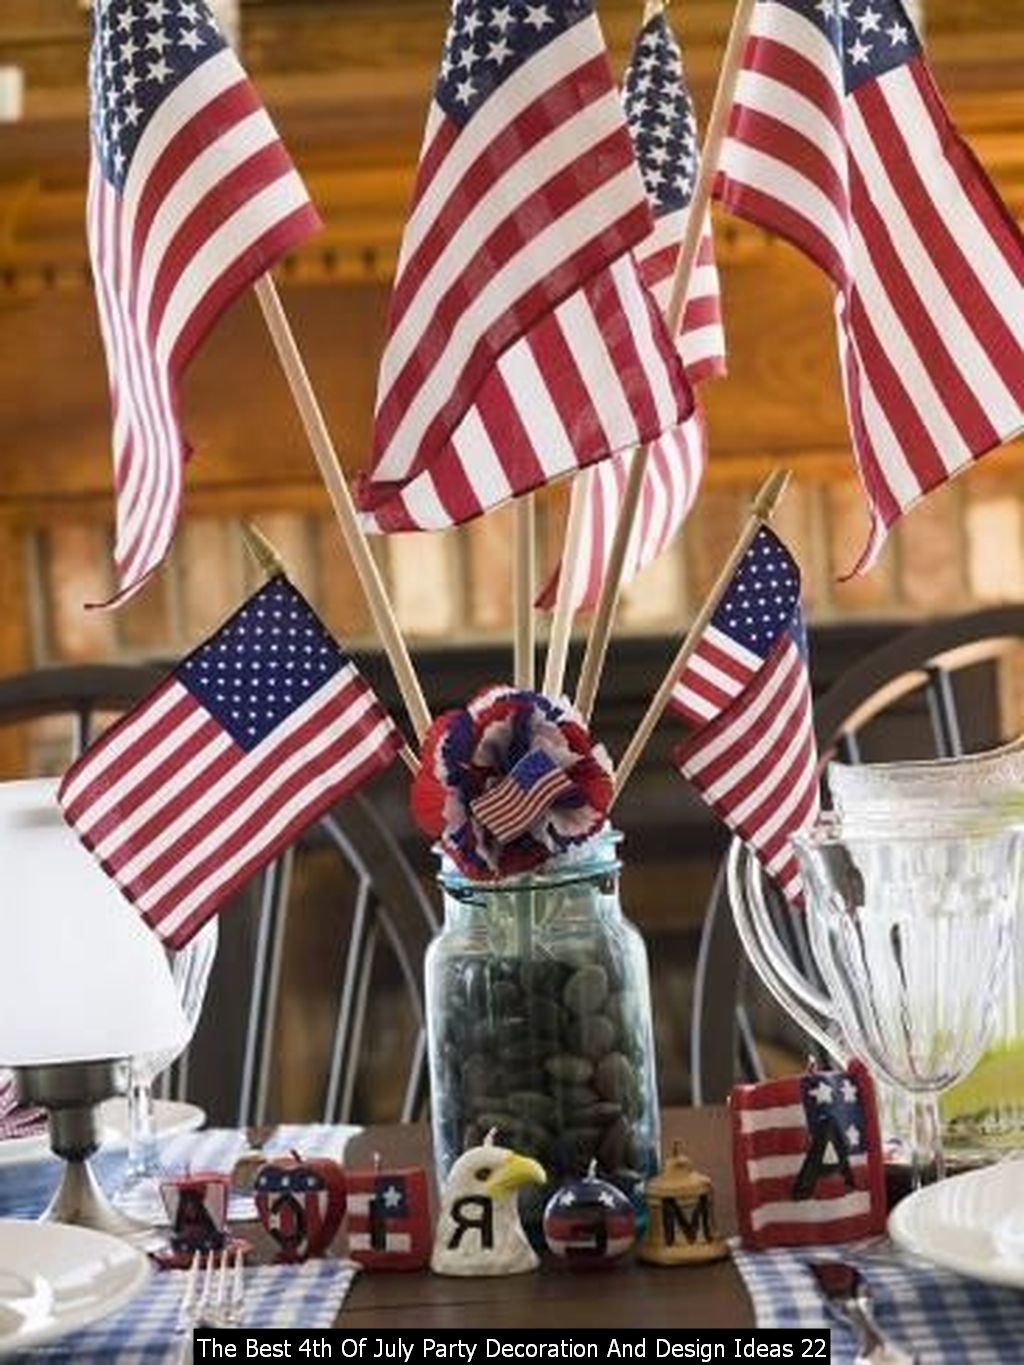 The Best 4th Of July Party Decoration And Design Ideas 22